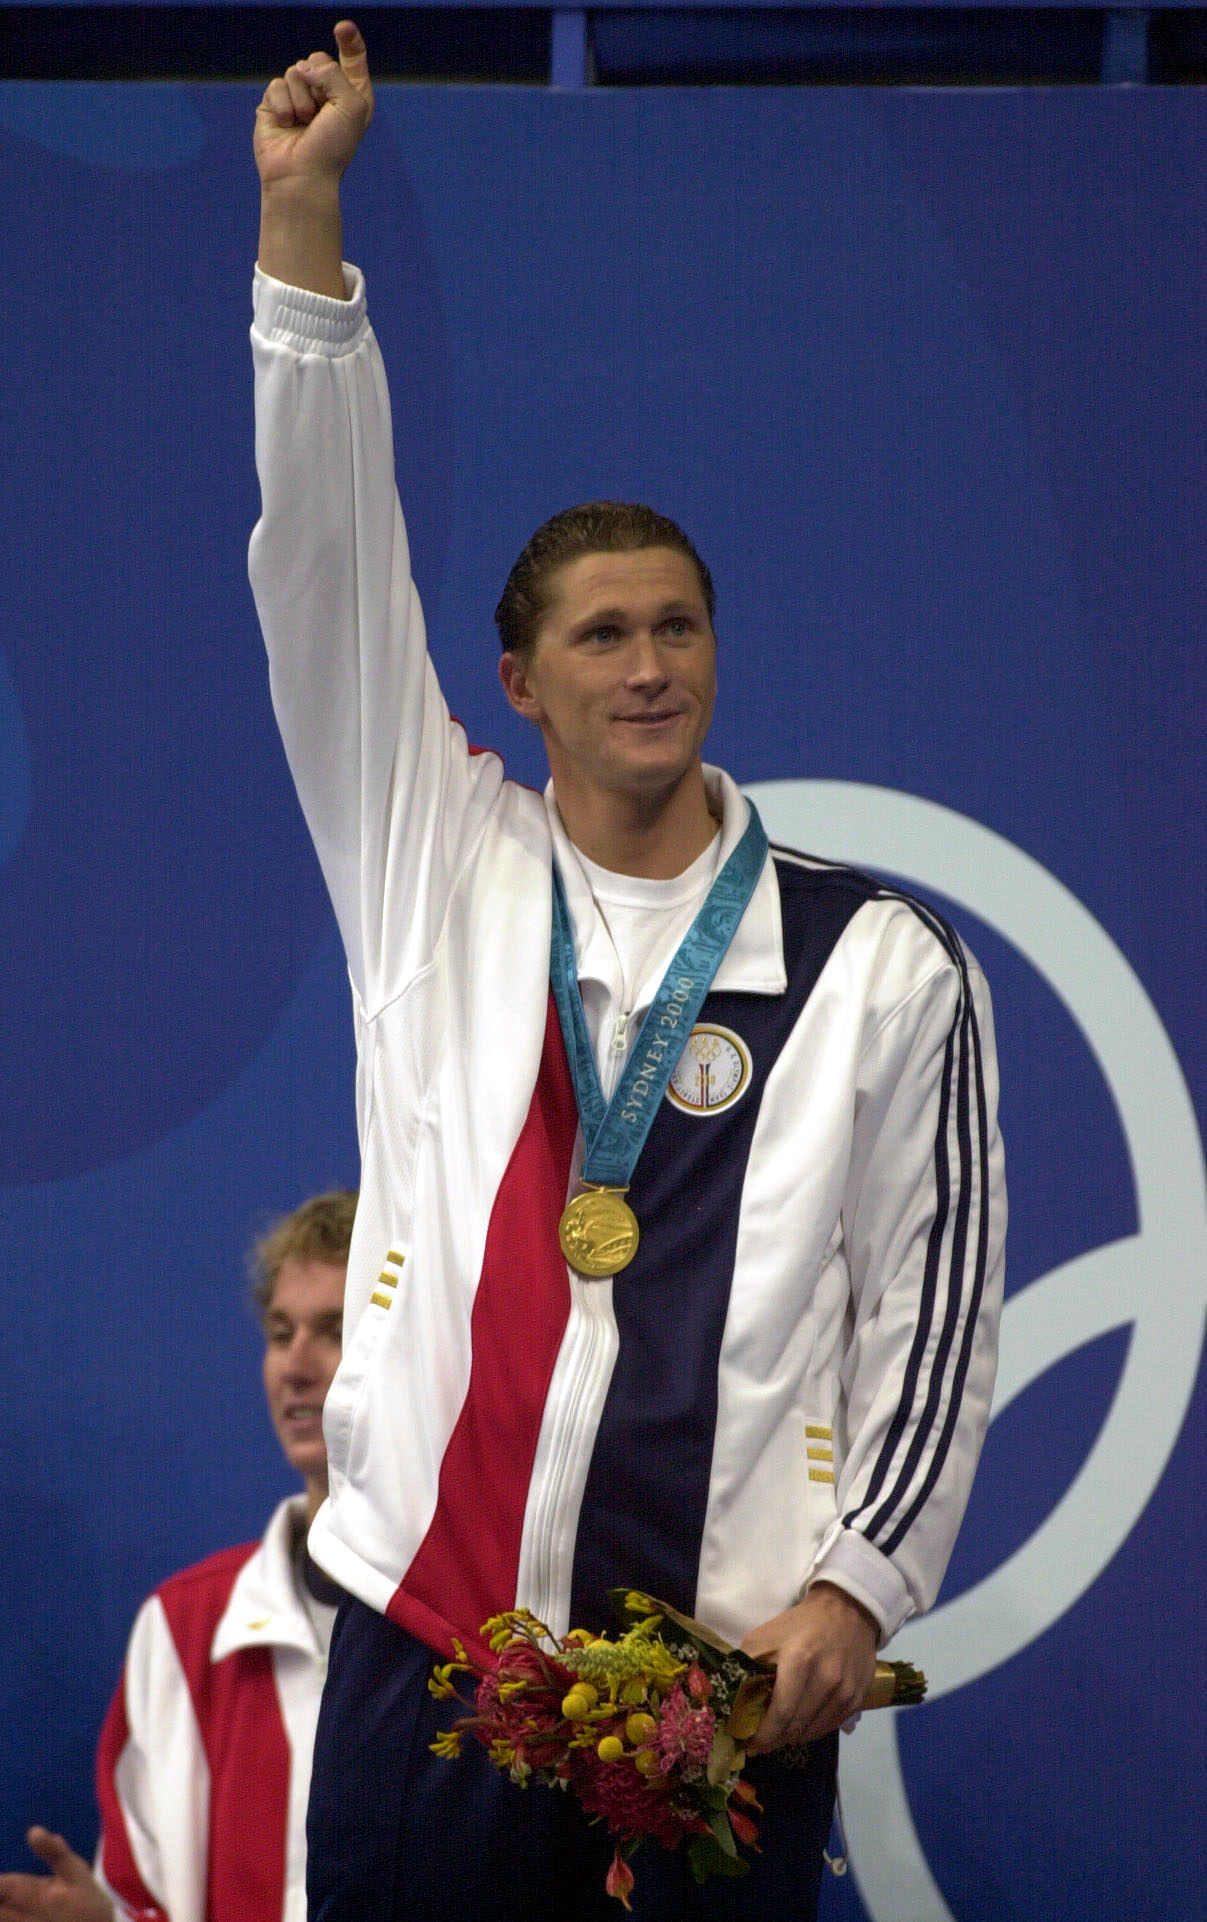 21 Sep 2000:  Lenny Krayzelburg of the USA celebrates with his gold medal after victory in the Mens 200m Backstroke Final during the Sydney 2000 Olympic Games at the Aquatic Centre, Olympic Park, Sydney, Australia. DIGITAL IMAGE. Mandatory Credit: Ross Ki